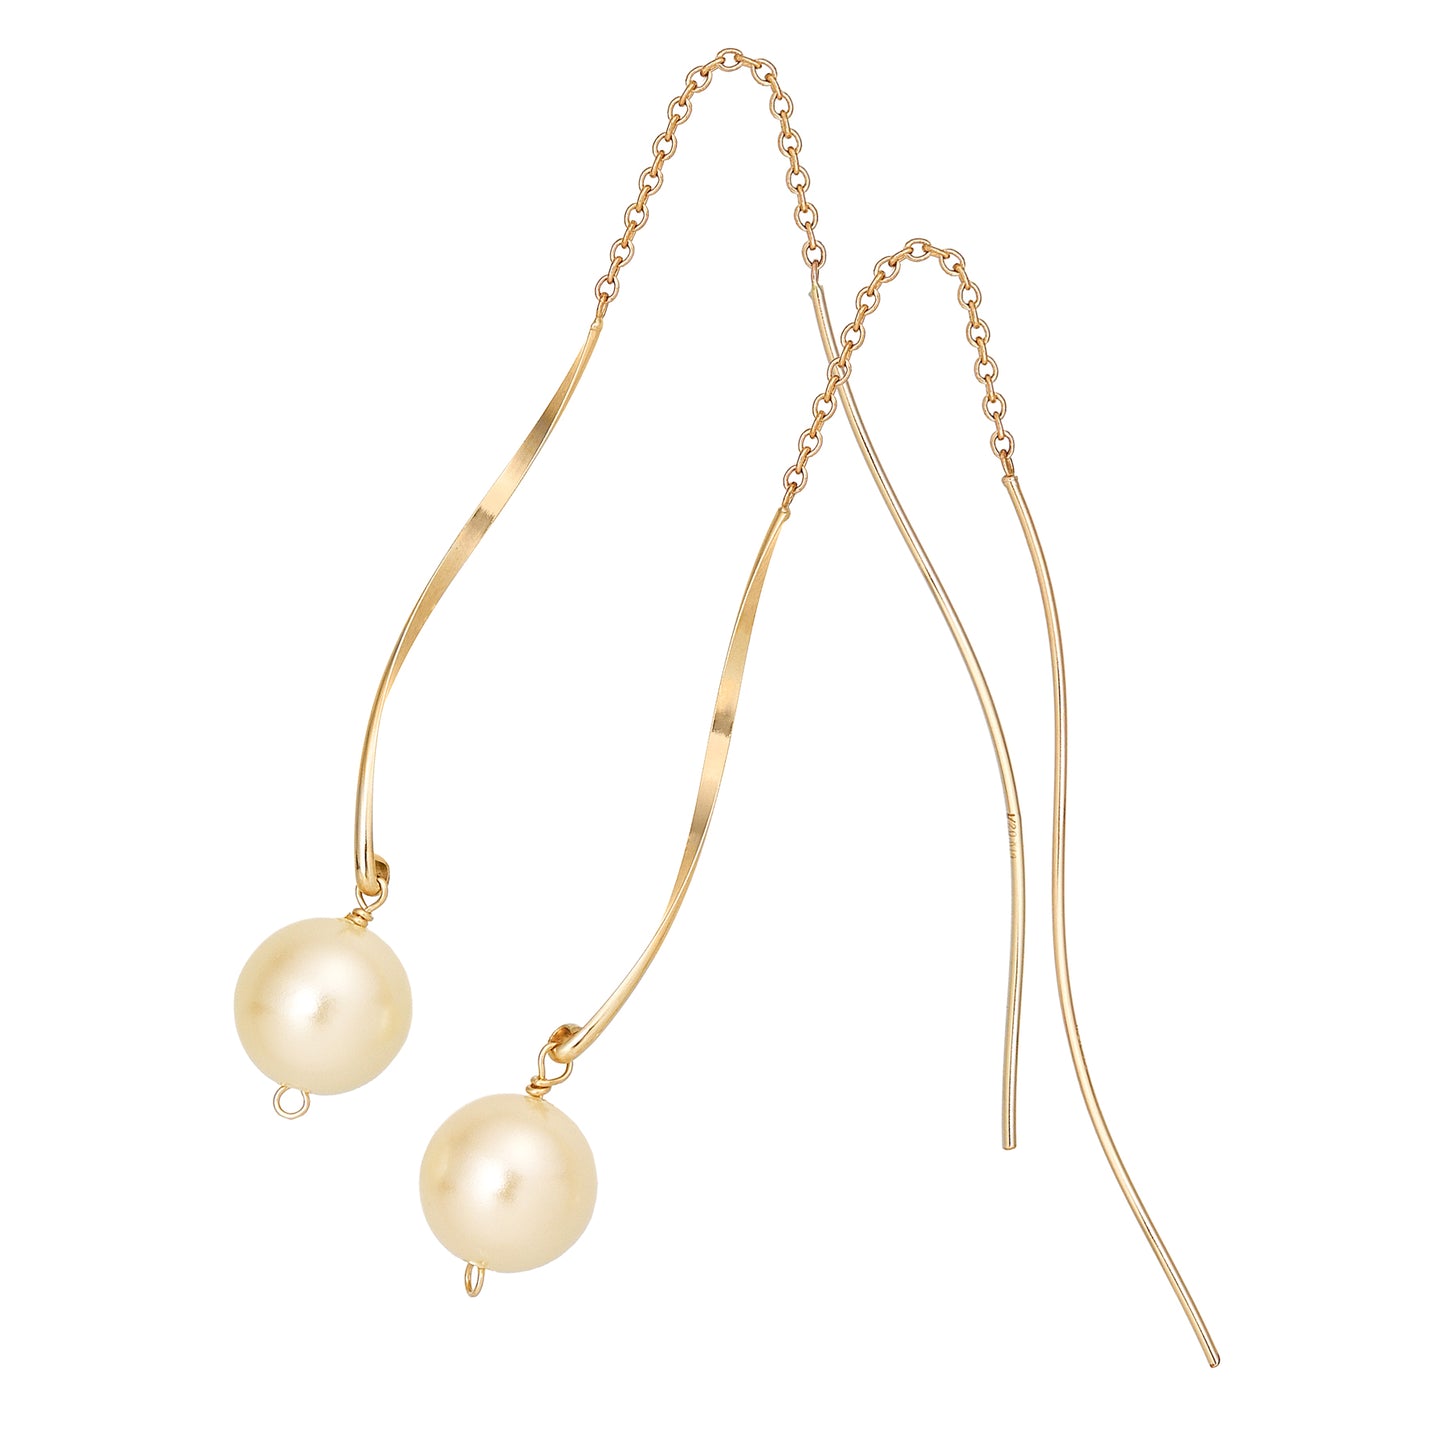 Gold Filled Wave Line Pearl Earrings - Product Image